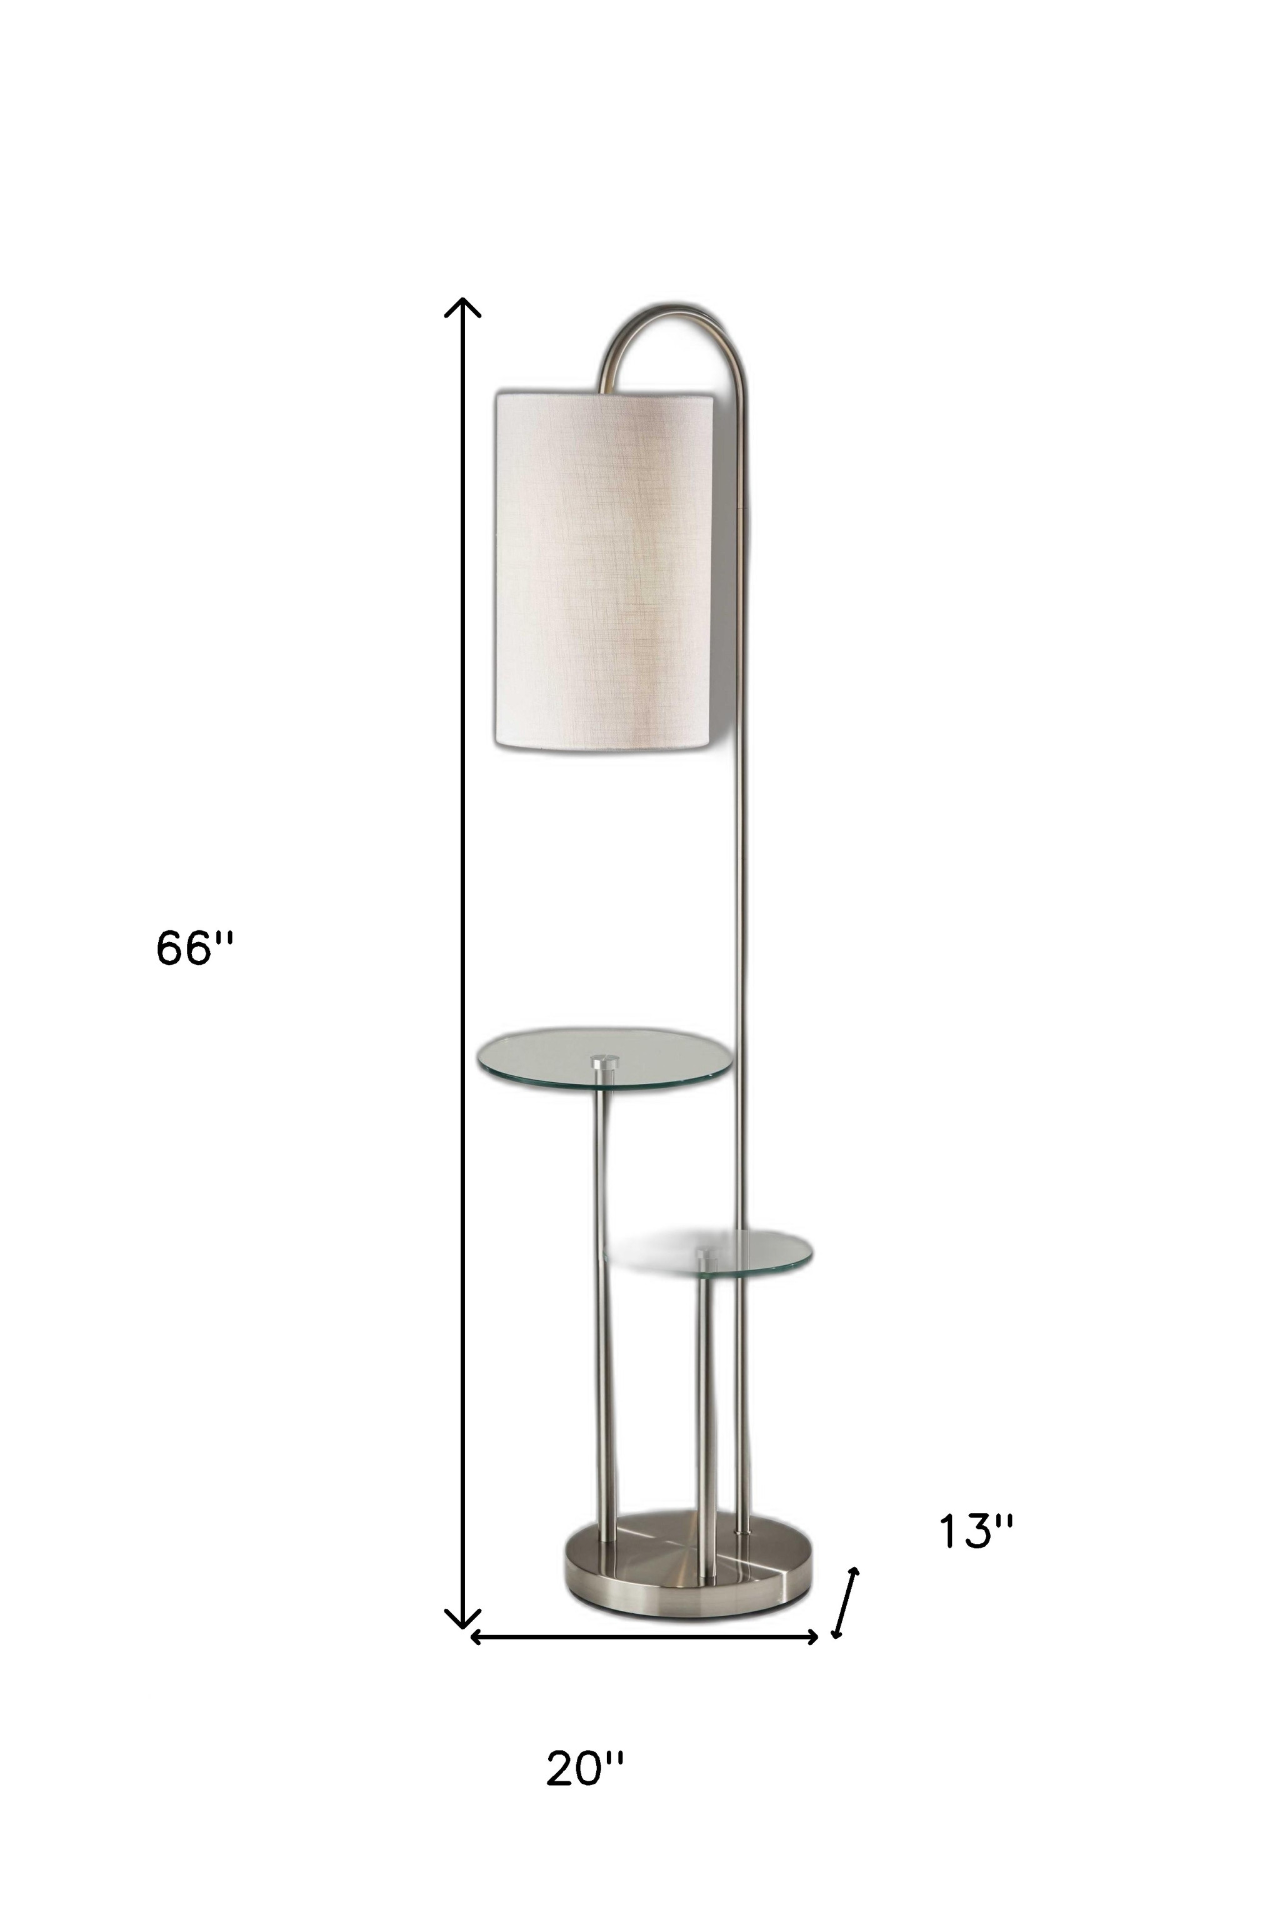 Contemporary Design Floor Lamp With Tray Table (66"H)